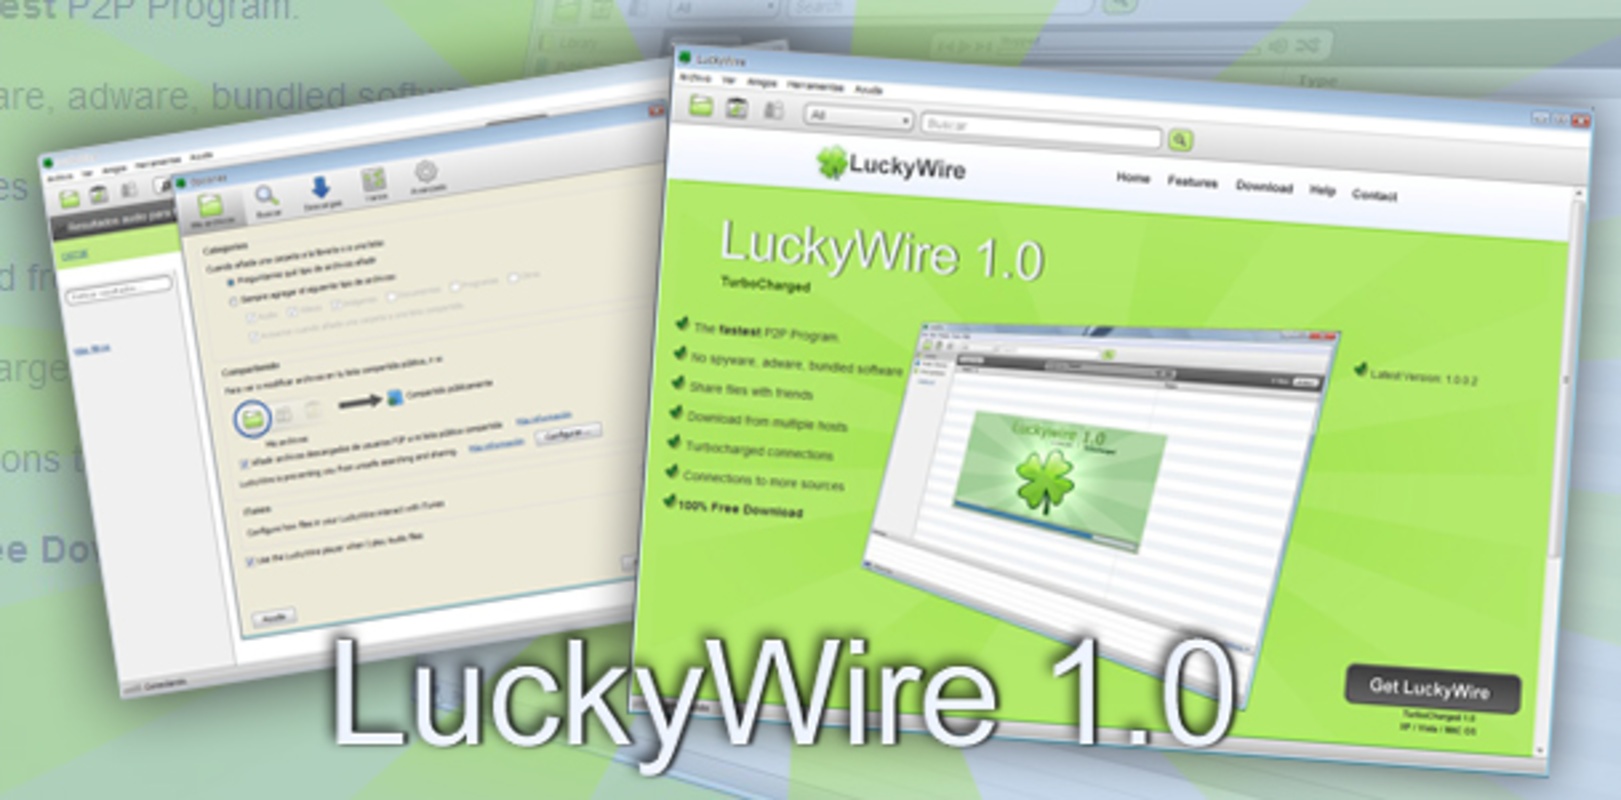 LuckyWire 1.0.0.2 feature